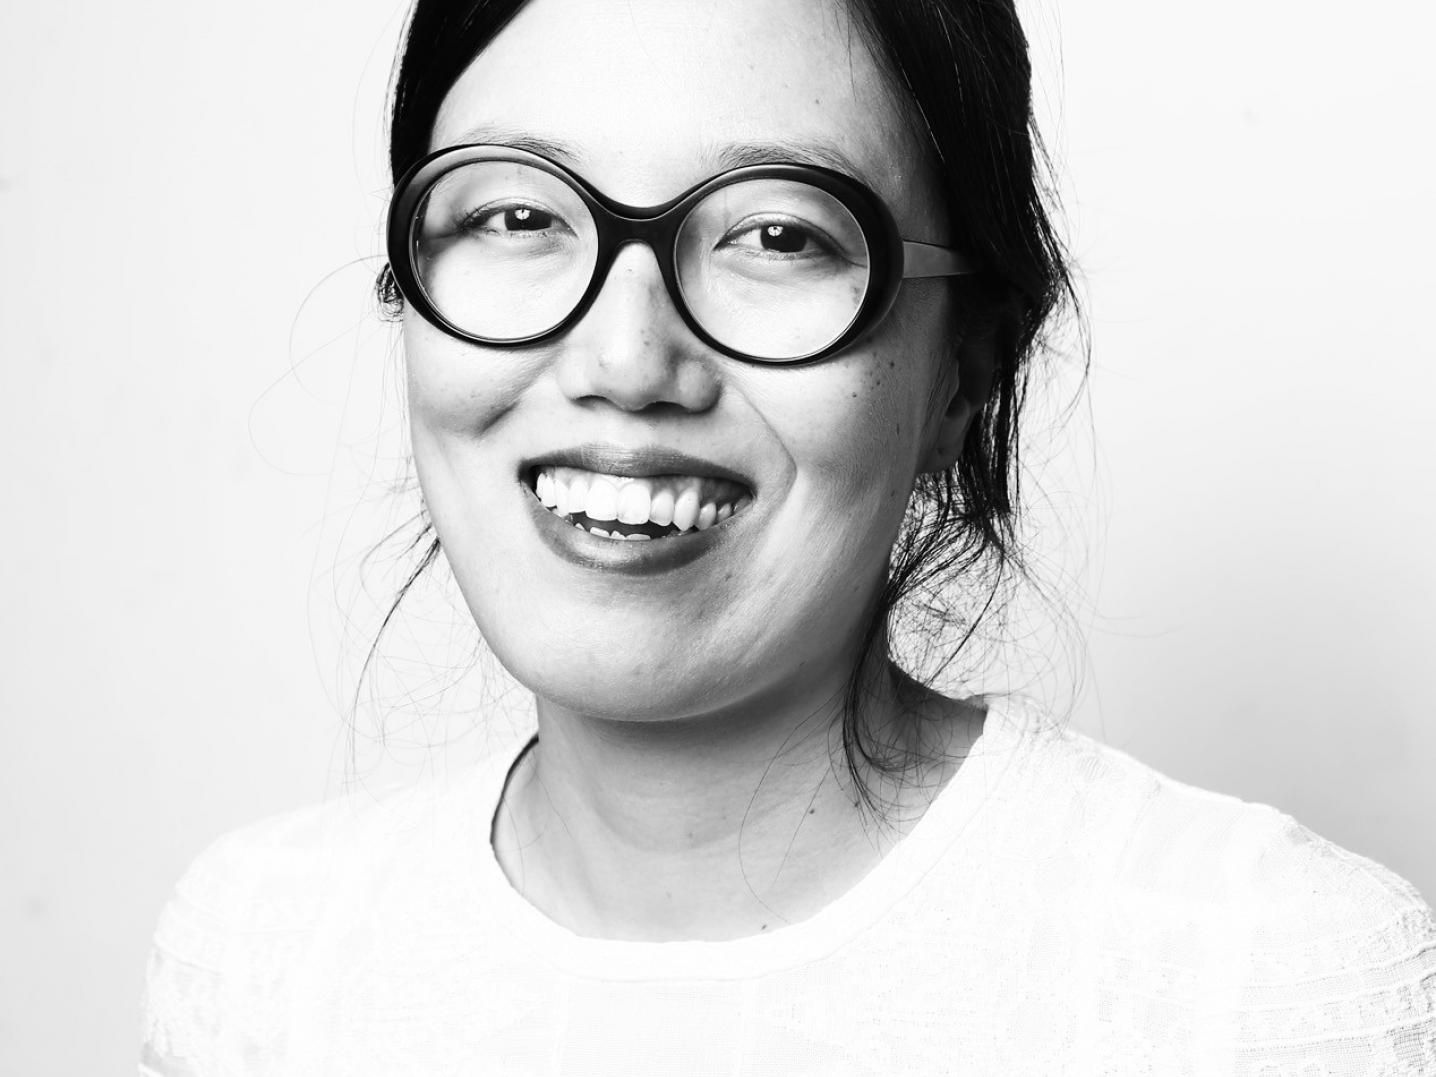 BW portrait of woman with glasses